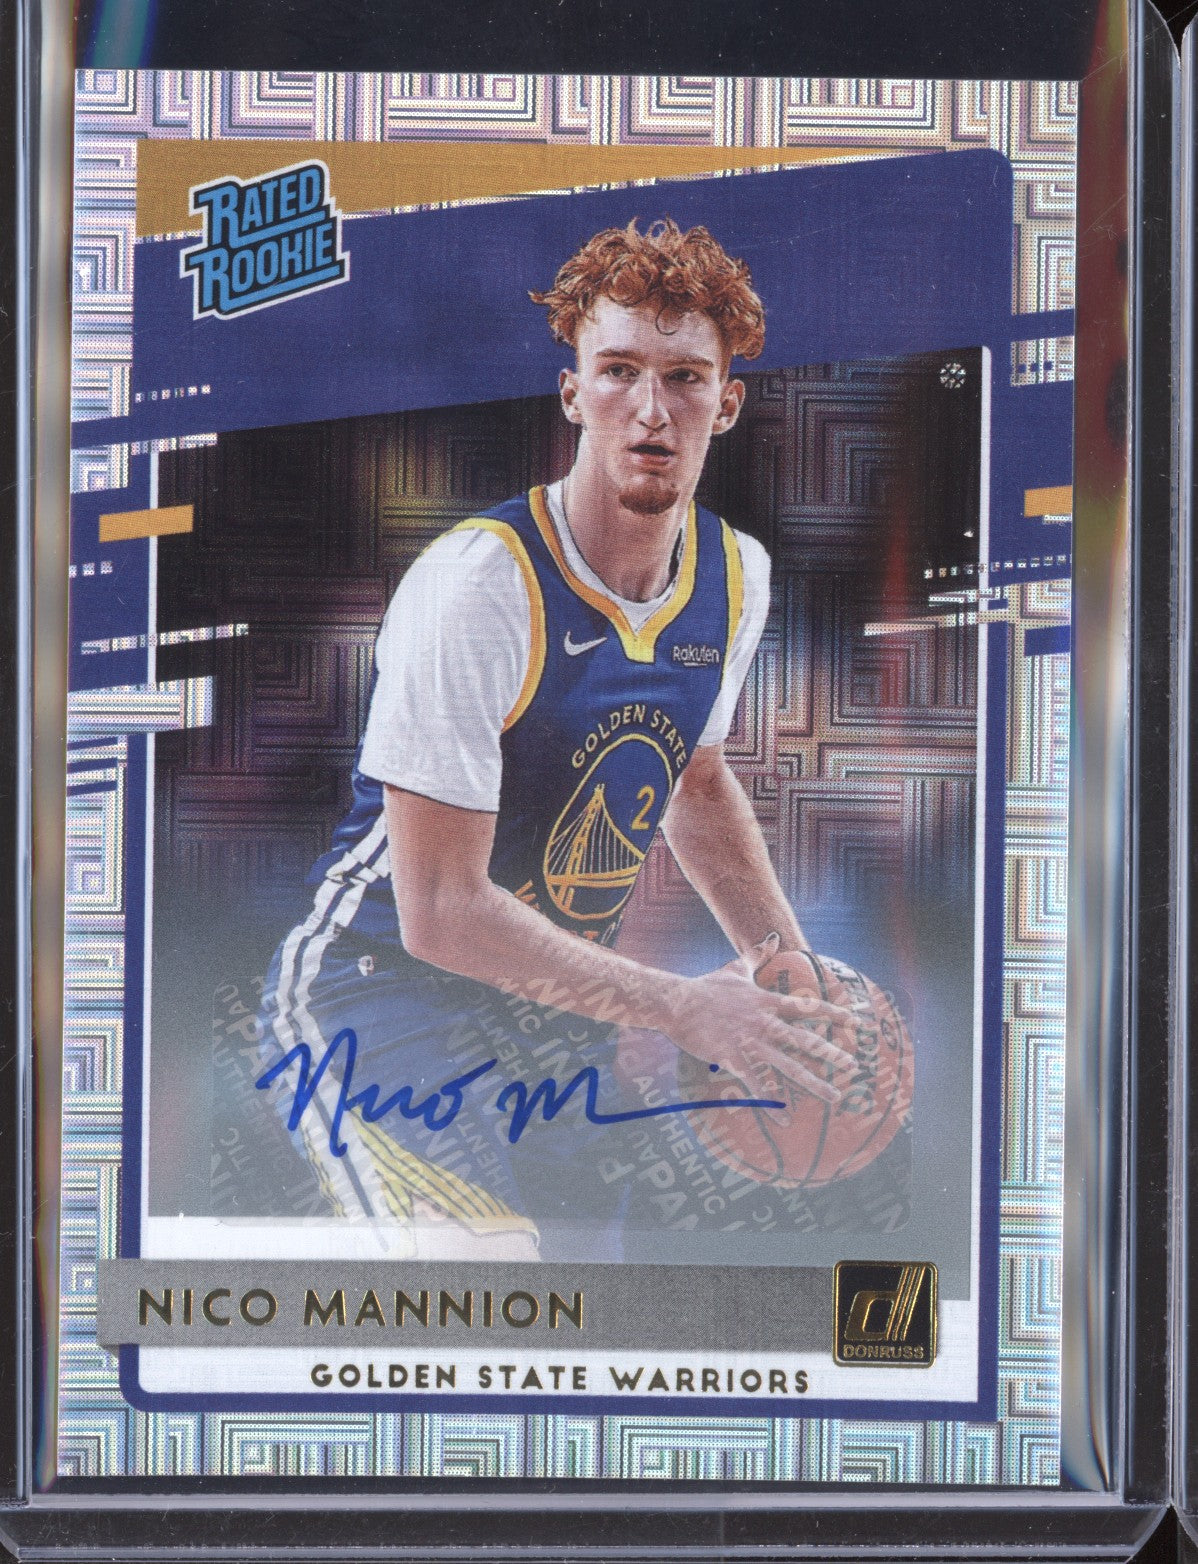 2020-21 Nico Mannion Rookie Card Lot of 3 Golden State Warriors